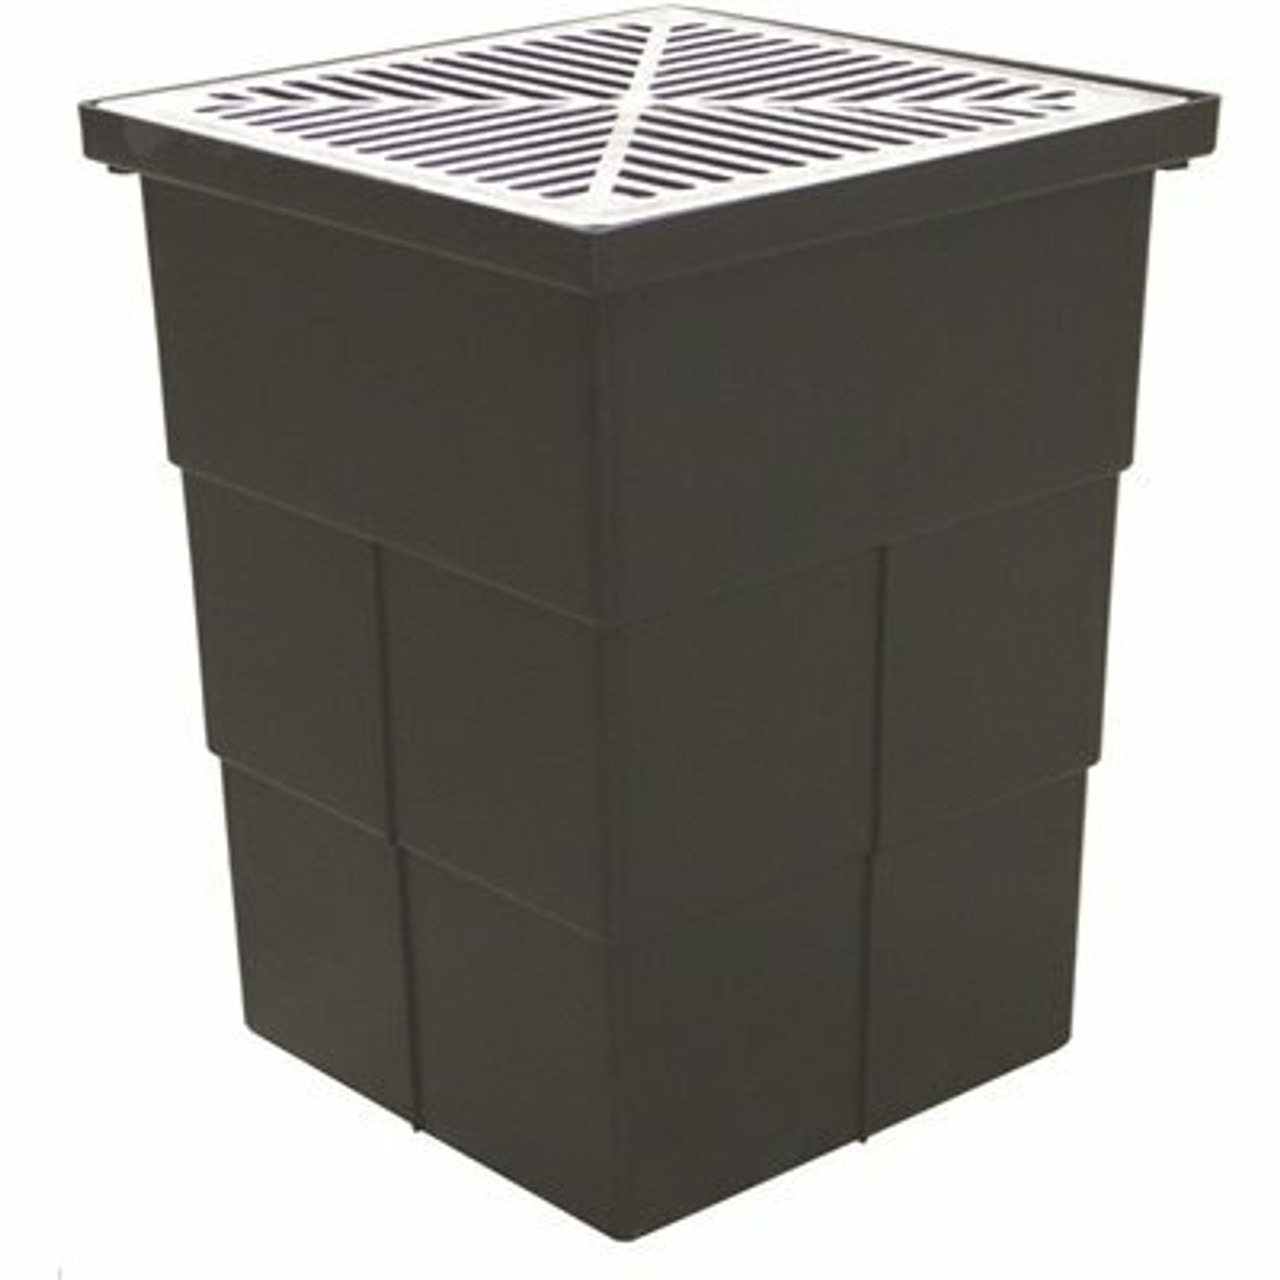 18 In. X 14 In. Storm Water Pit And Catch Basin For Modular Trench And Channel Drain Systems With Aluminum Grate